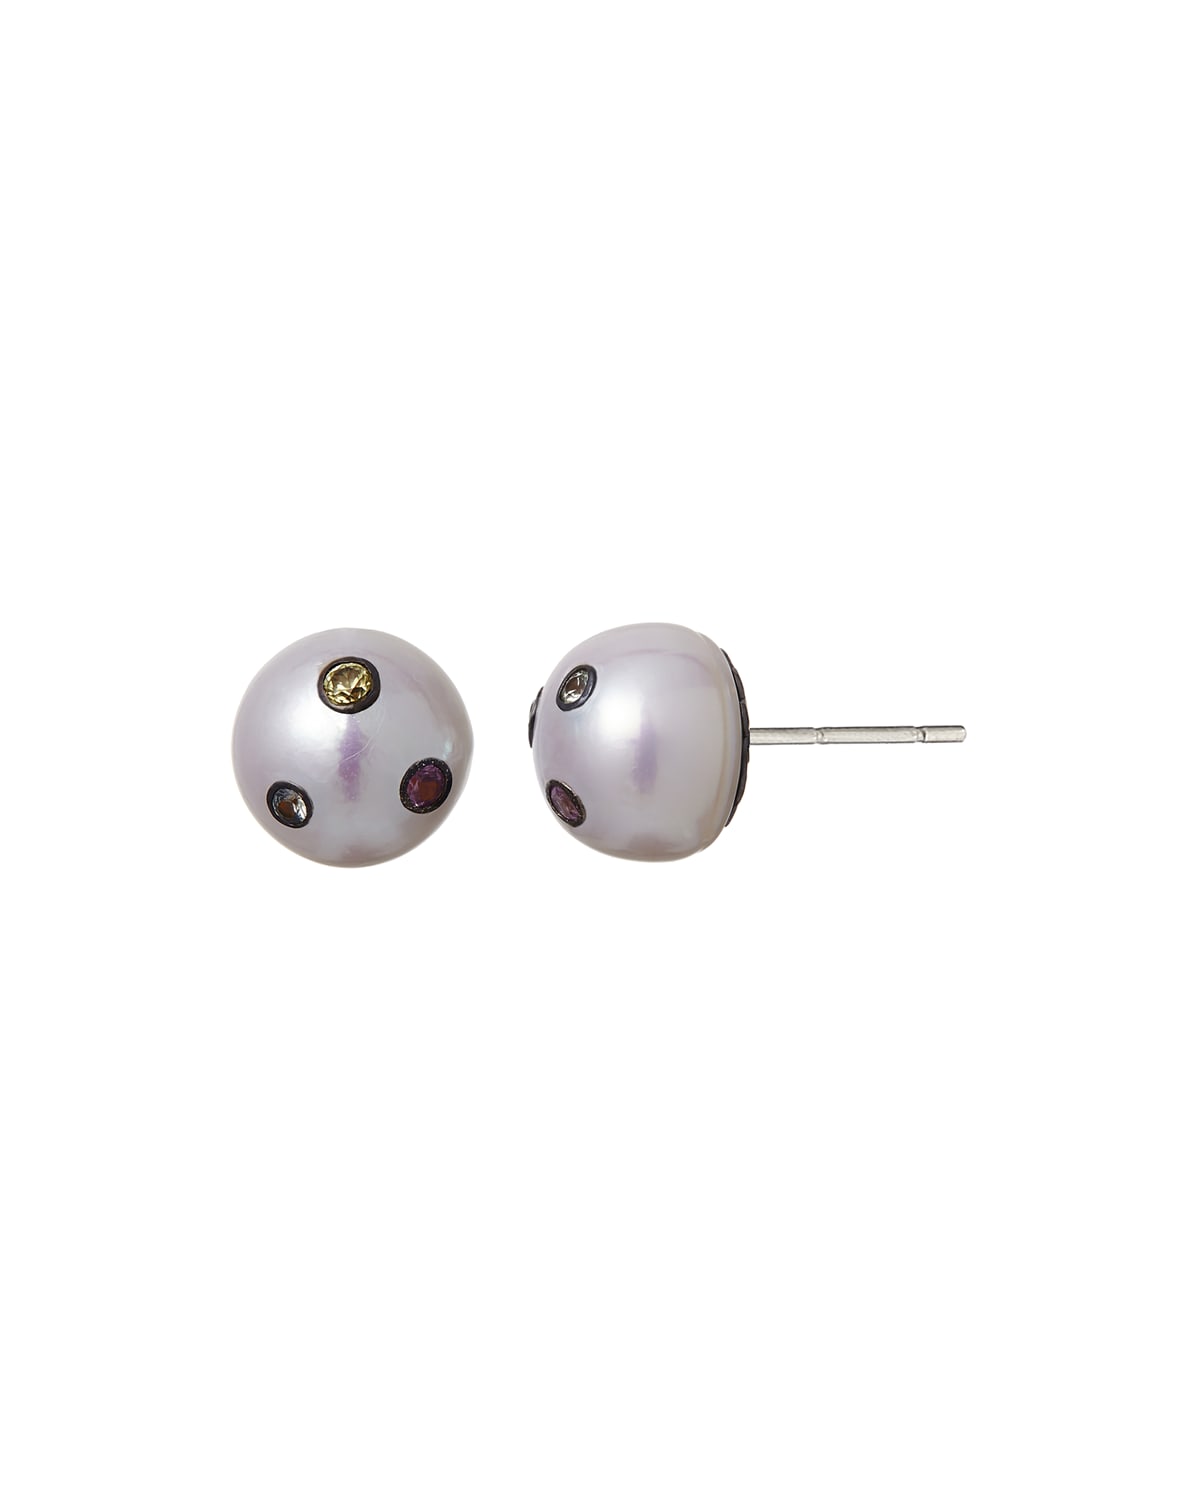 Sterling Silver Round Hammered Stud Earring Loop Post 9.5mm Variable Color 